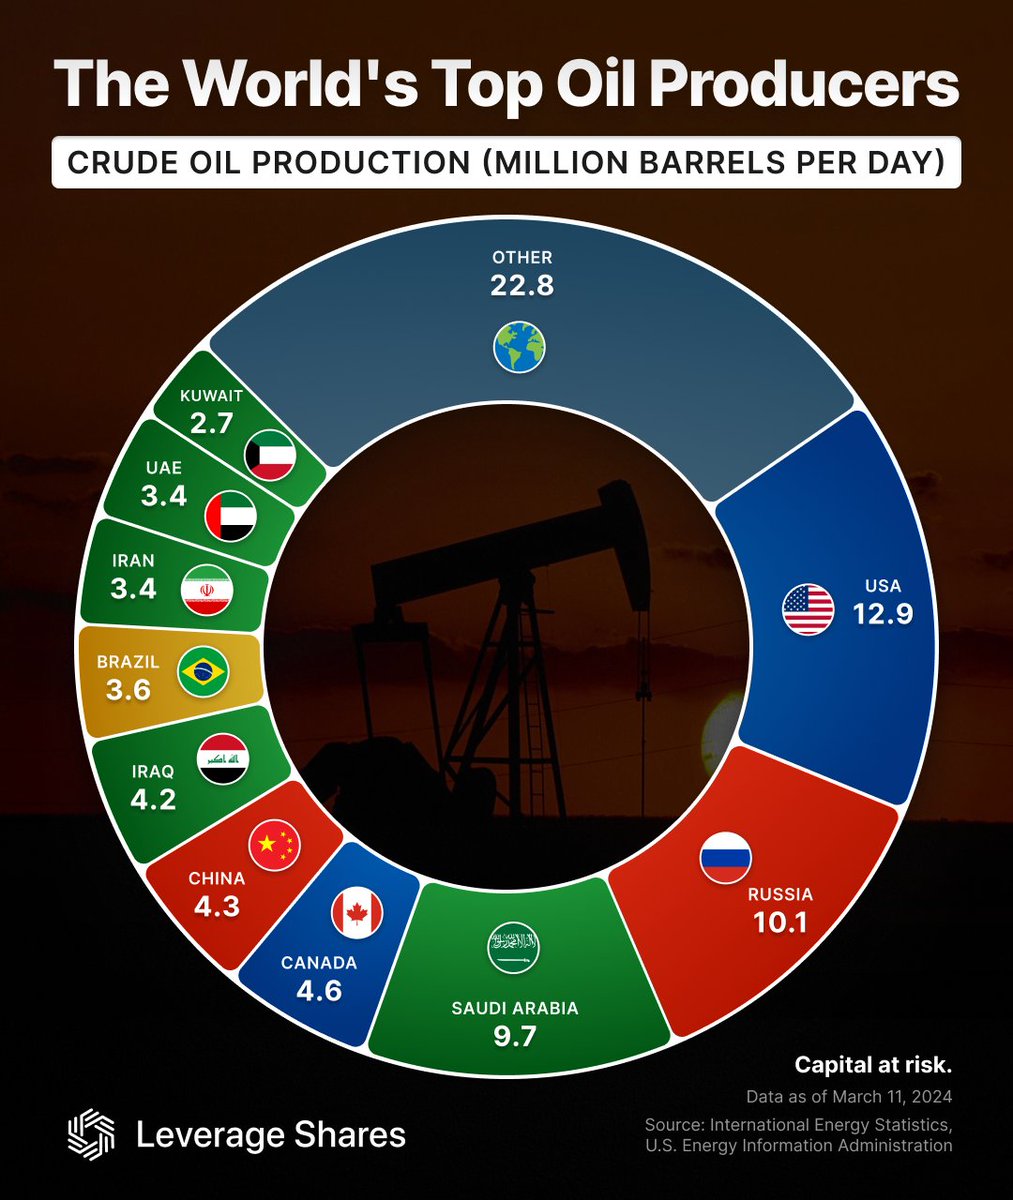 ⛽ Who's Fuelling the 🌍? #1 USA: 12.9M b/d #2 Russia: 10.1M b/d #3 Saudi Arabia: 9.7M b/d 🛢️ The US, Russia & Saudi Arabia account for ~40% of the world's oil production, amounting to 32.8M barrels per day (b/d) in 2023. Follow #LeverageShares for more. Capital at risk.